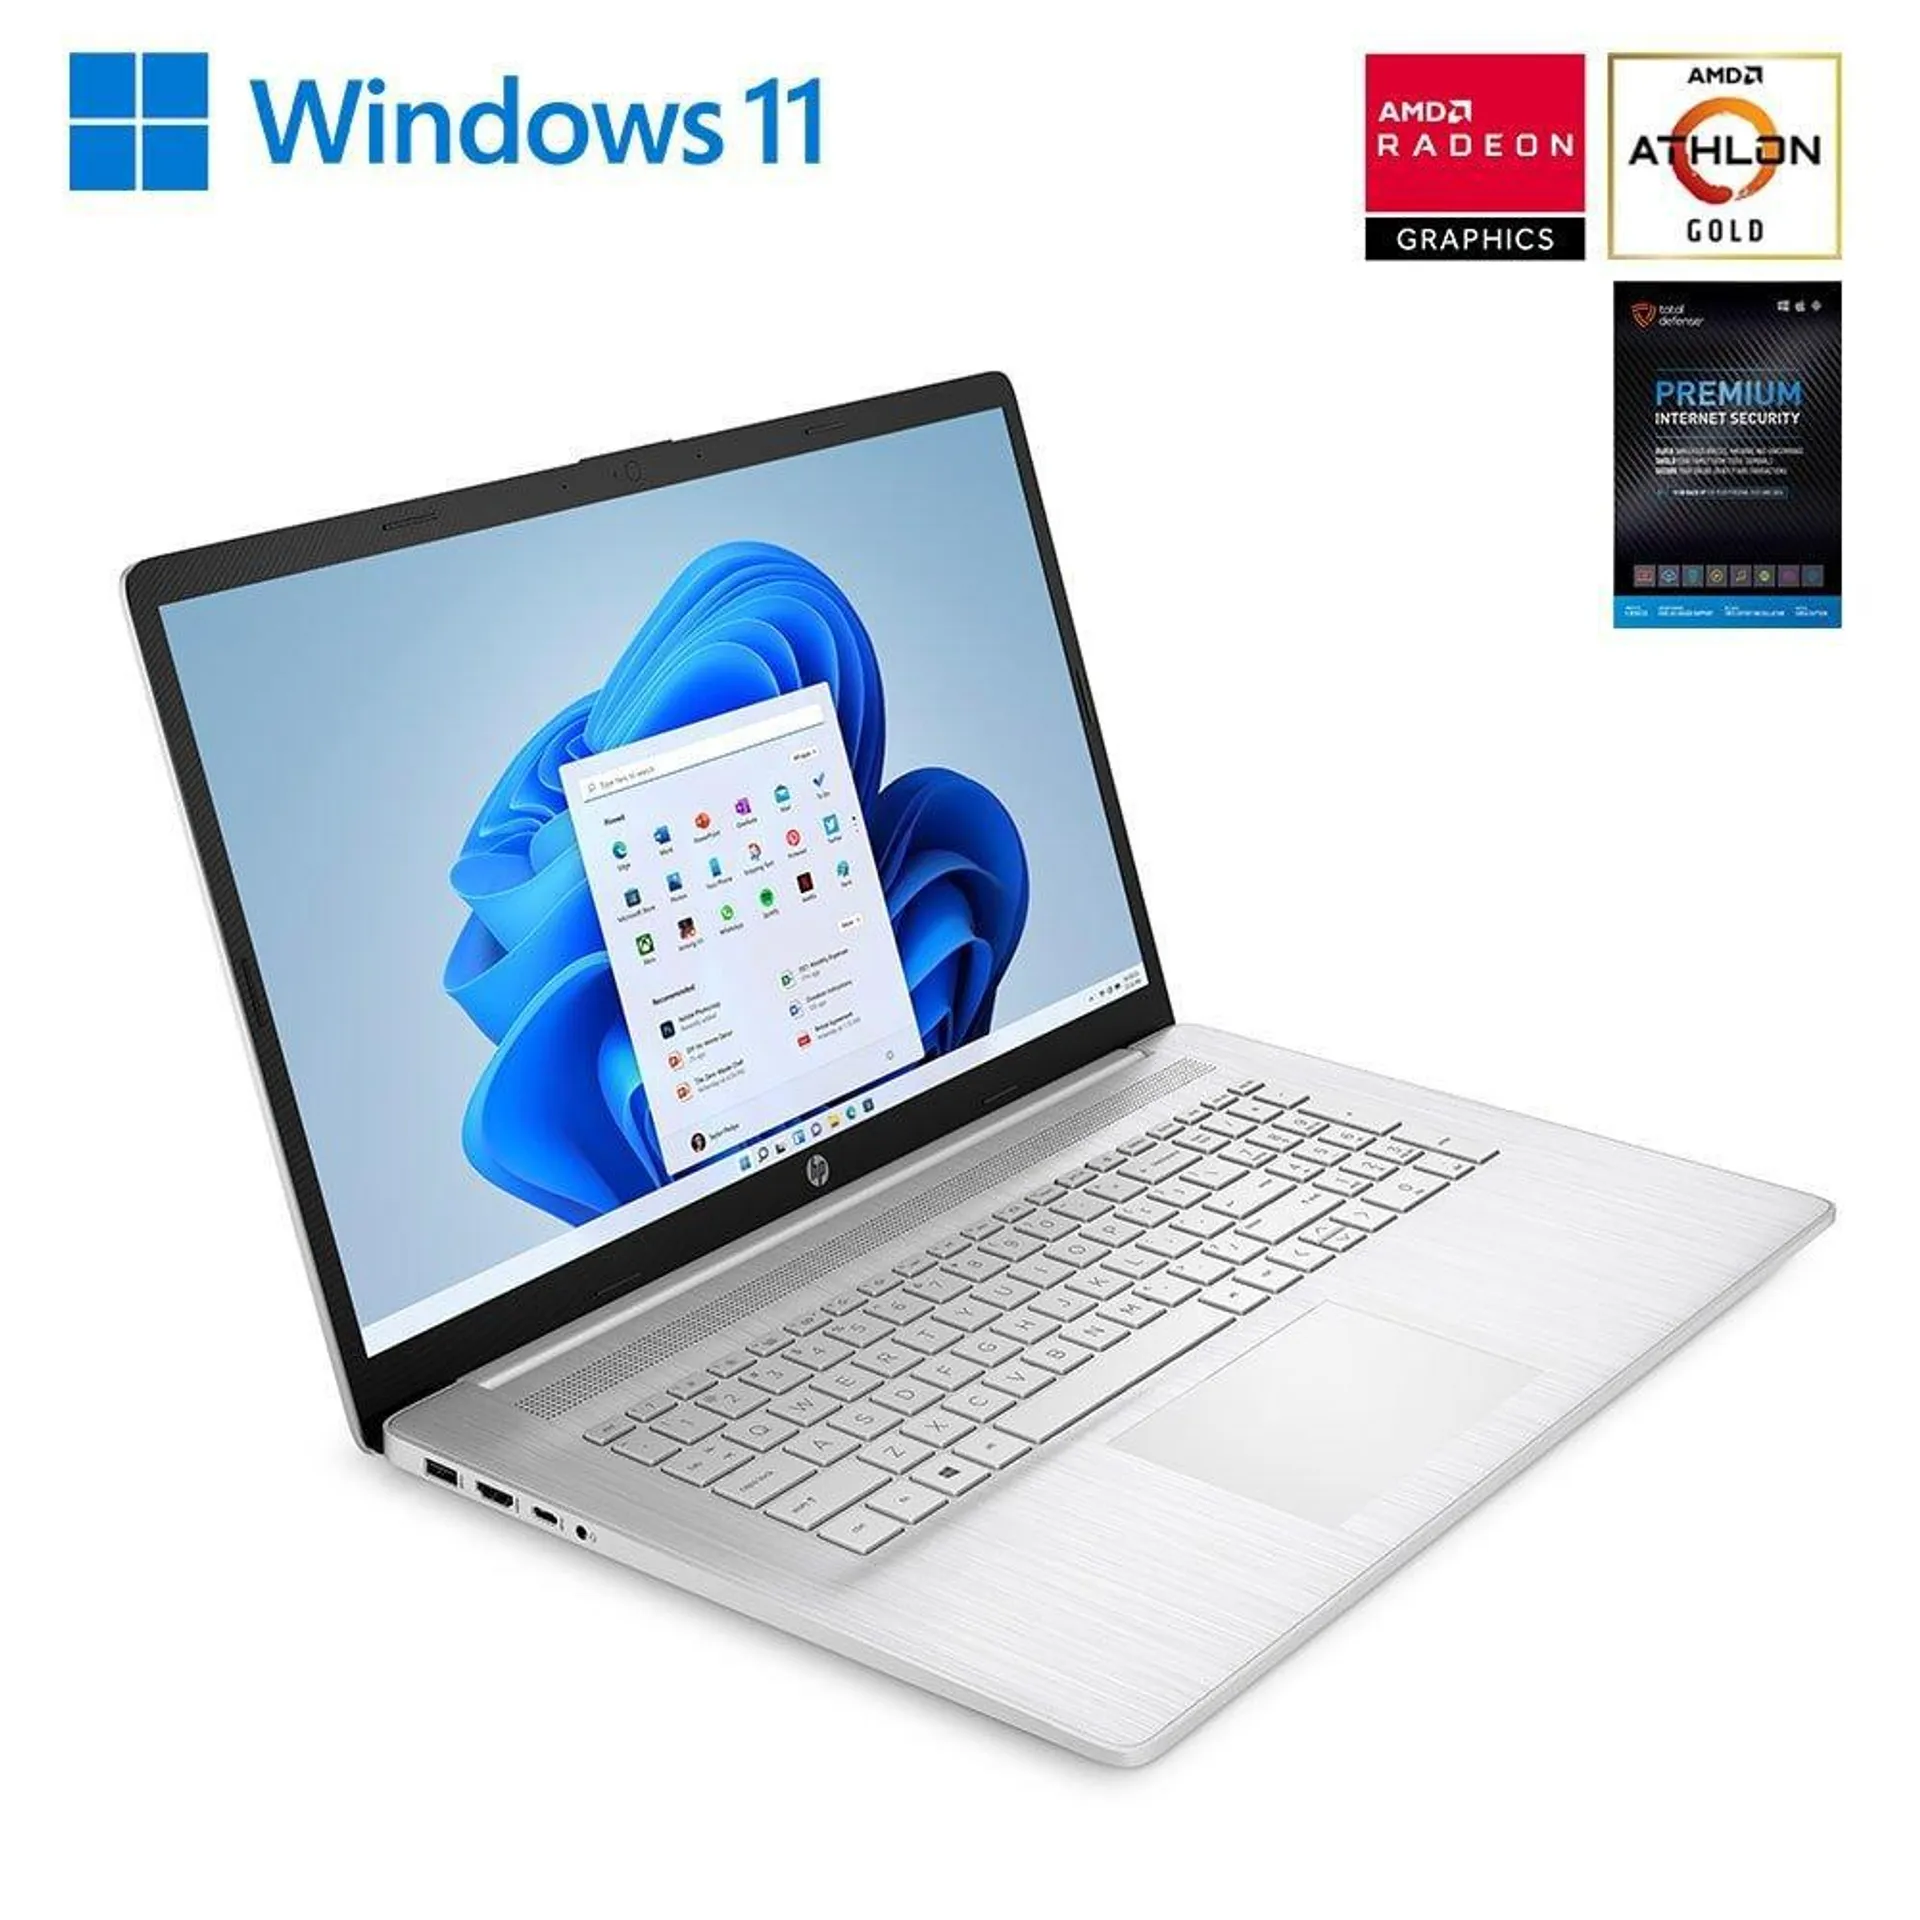 17" Notebook 1TB HDD Laptop w/ Total Defense Internet Security